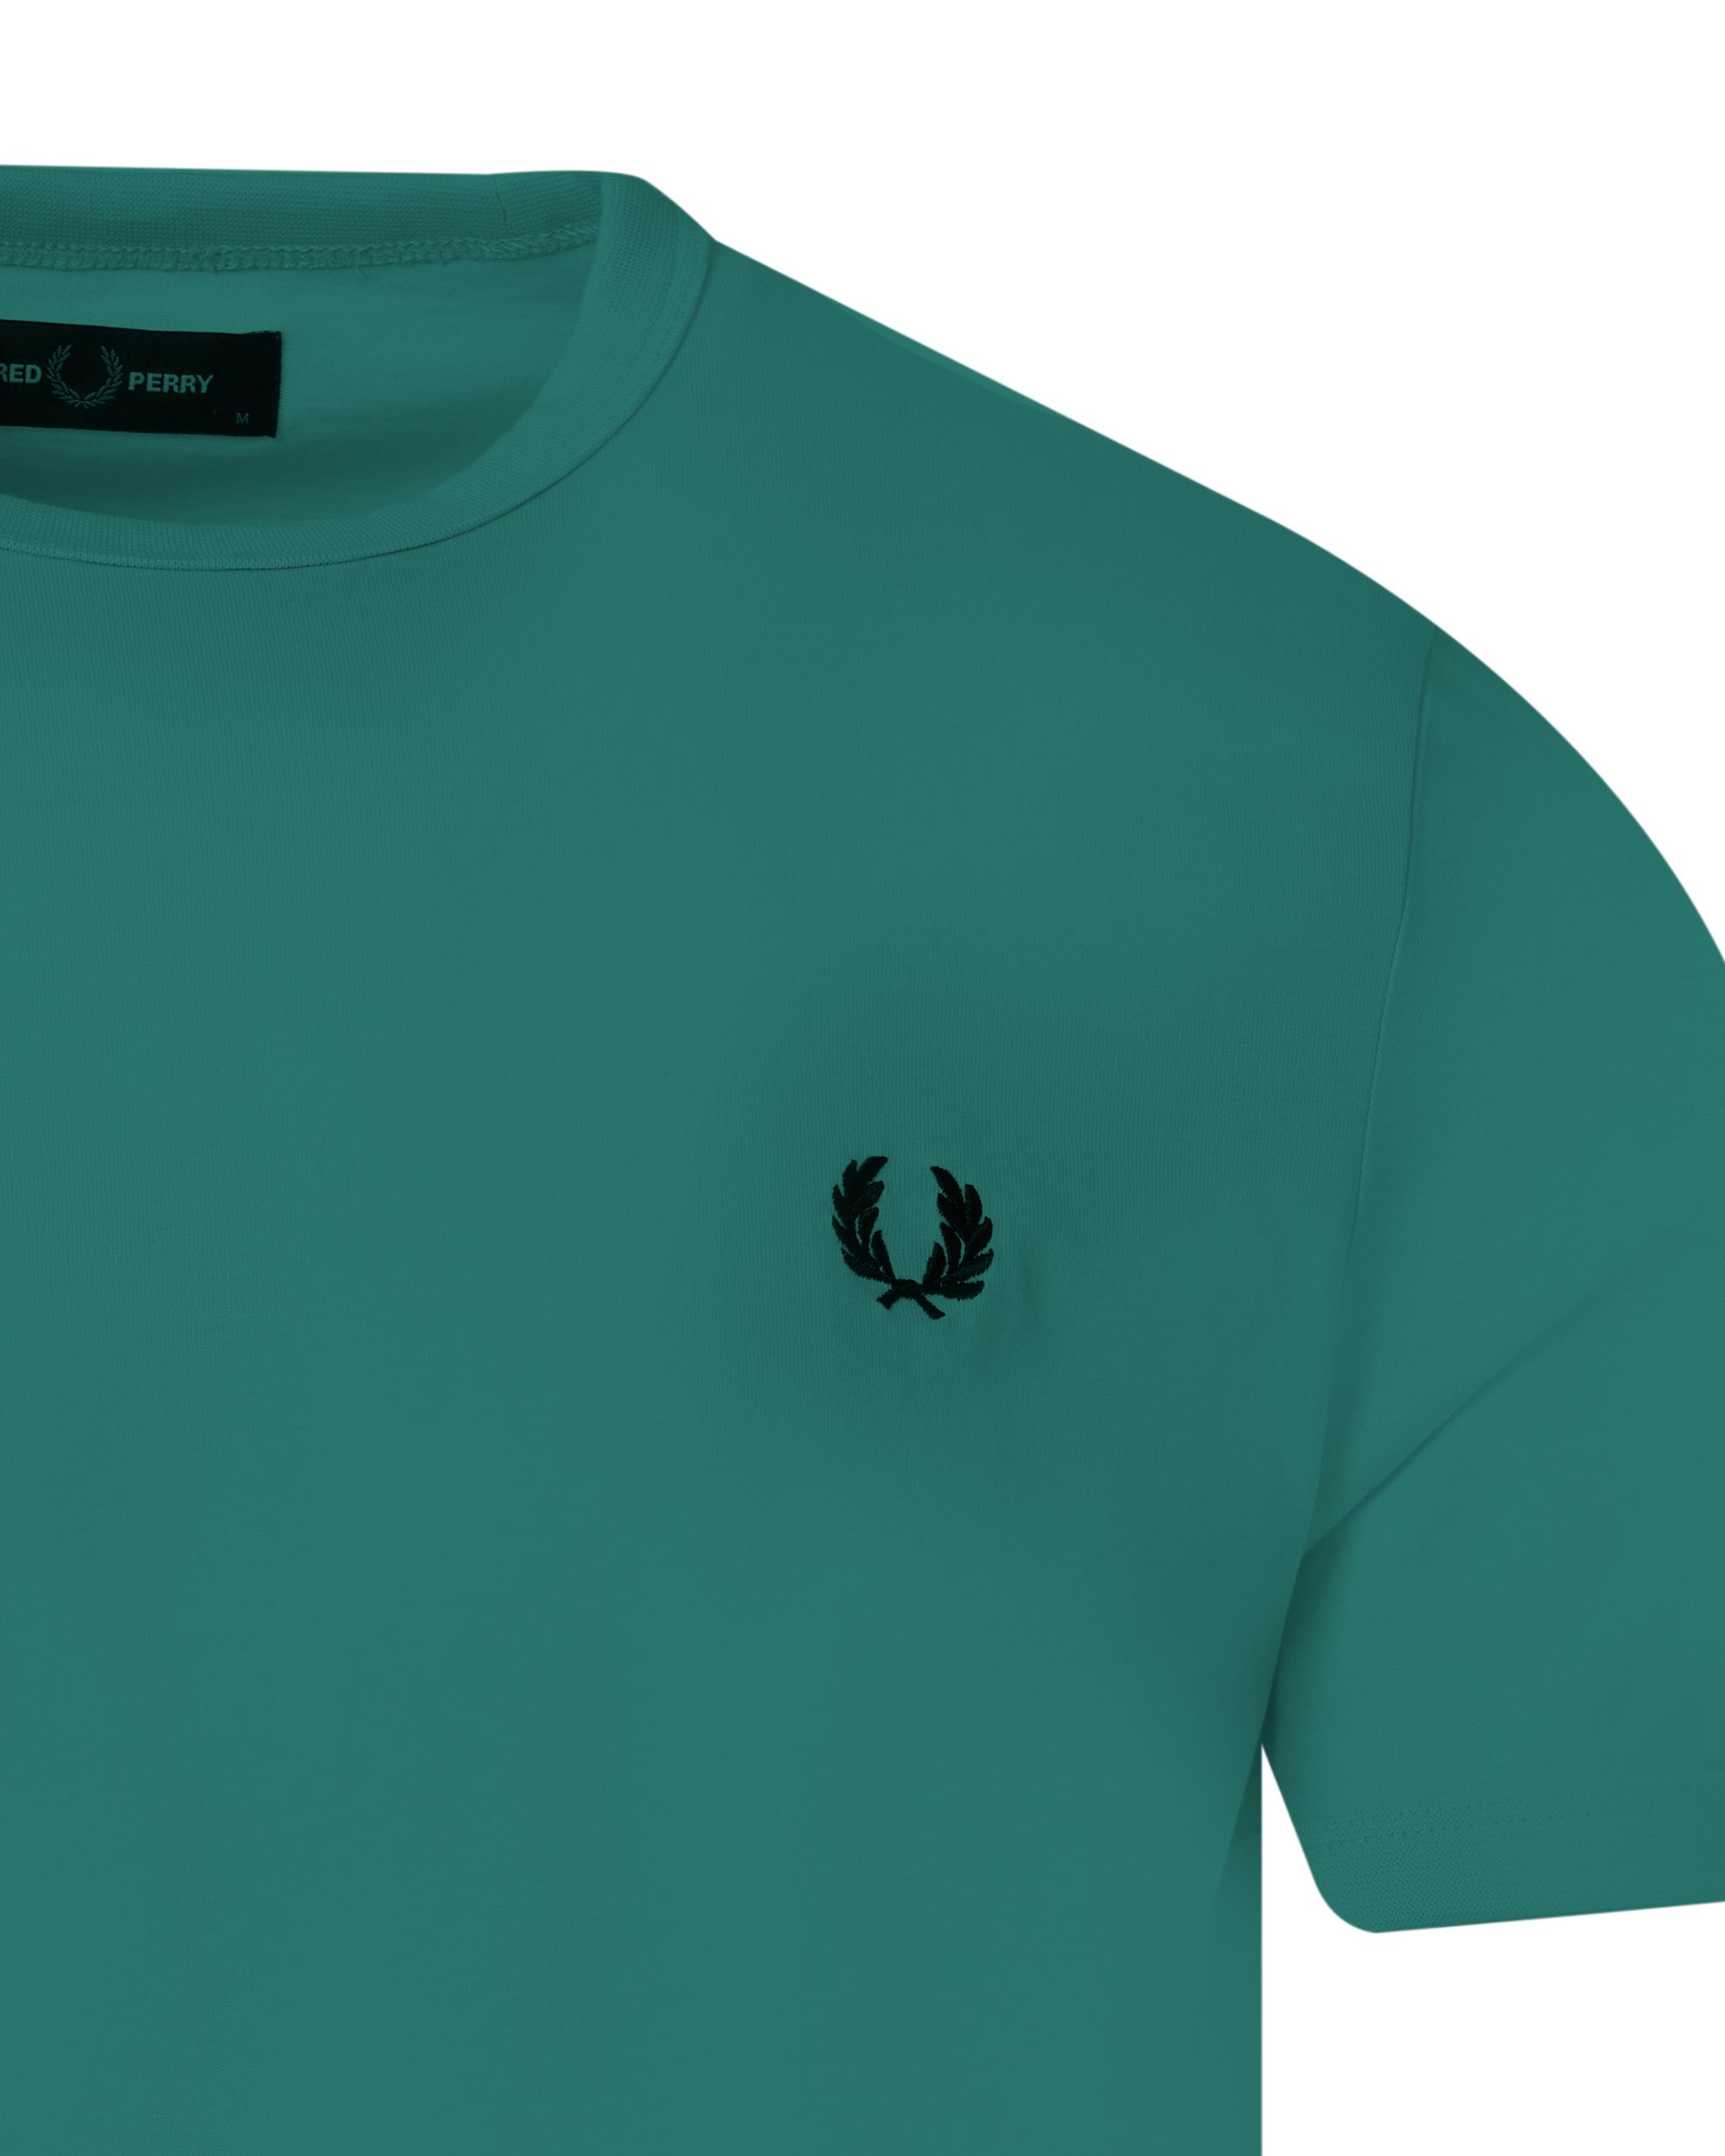 Fred Perry T-shirt KM Groen 083521-001-L